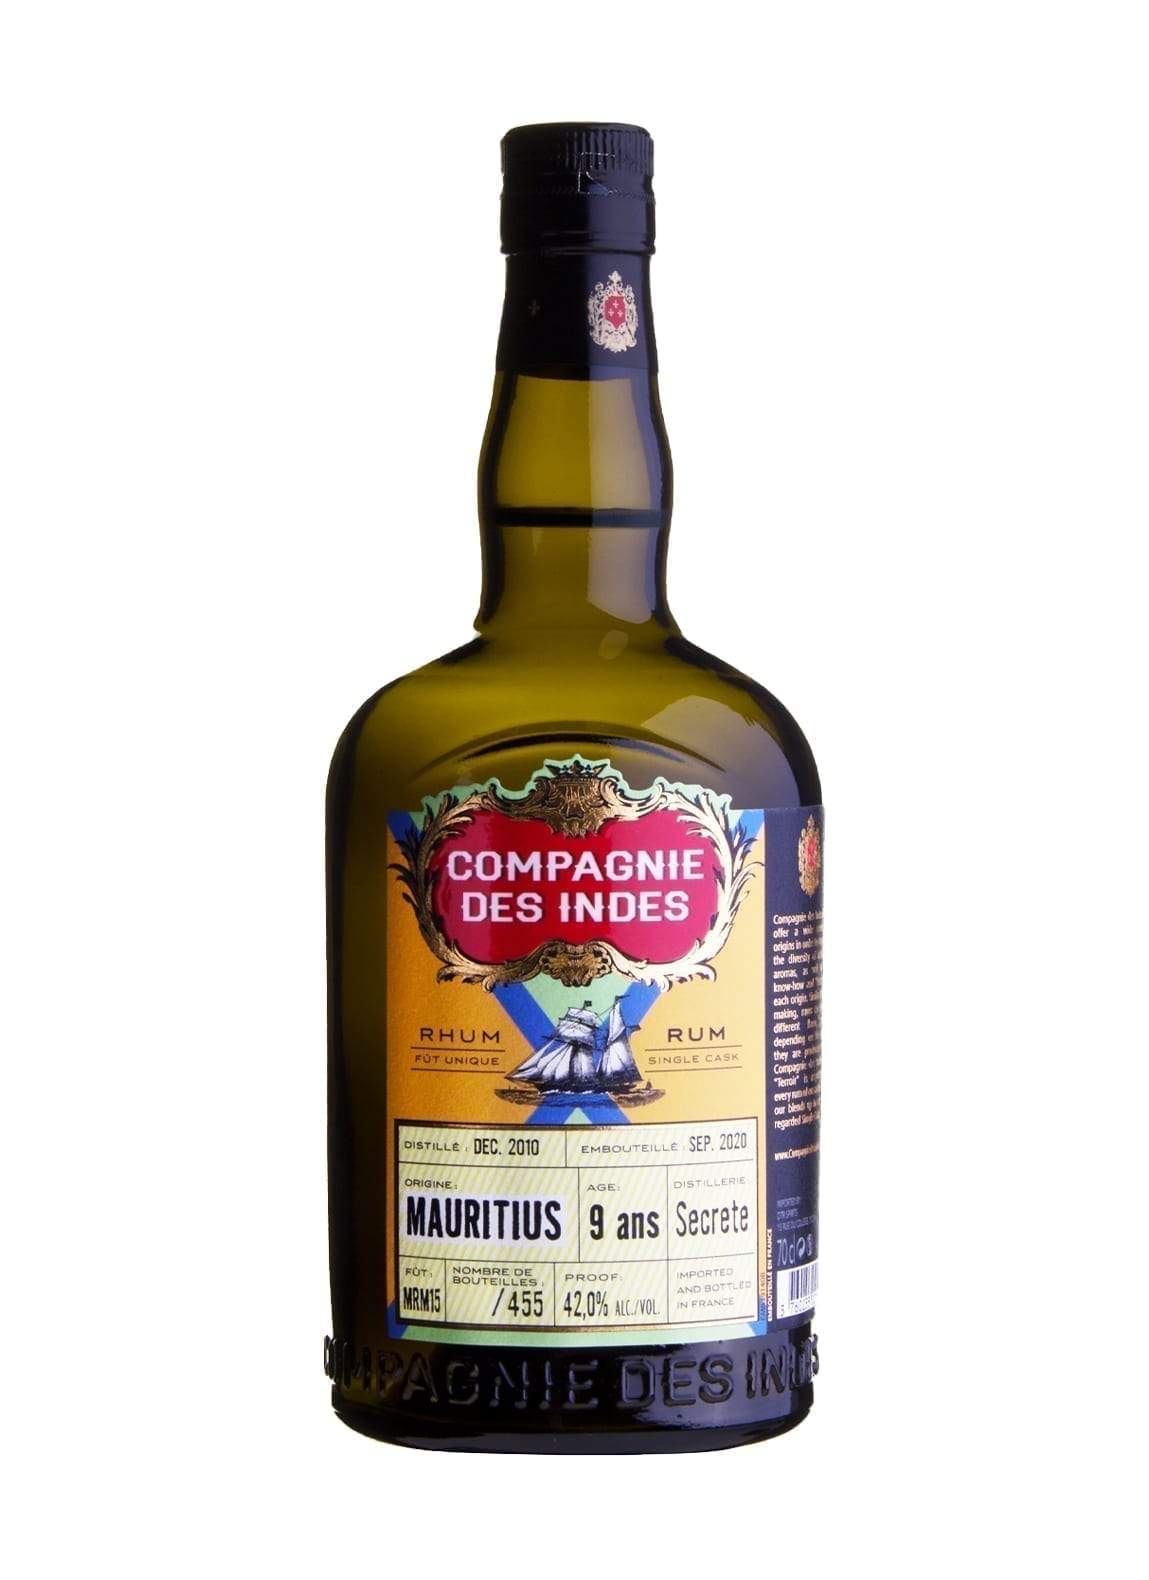 Compagnie Des Indes Rum Single Cask Mauritius 9 Years 42% 700ml | Rum | Shop online at Spirits of France